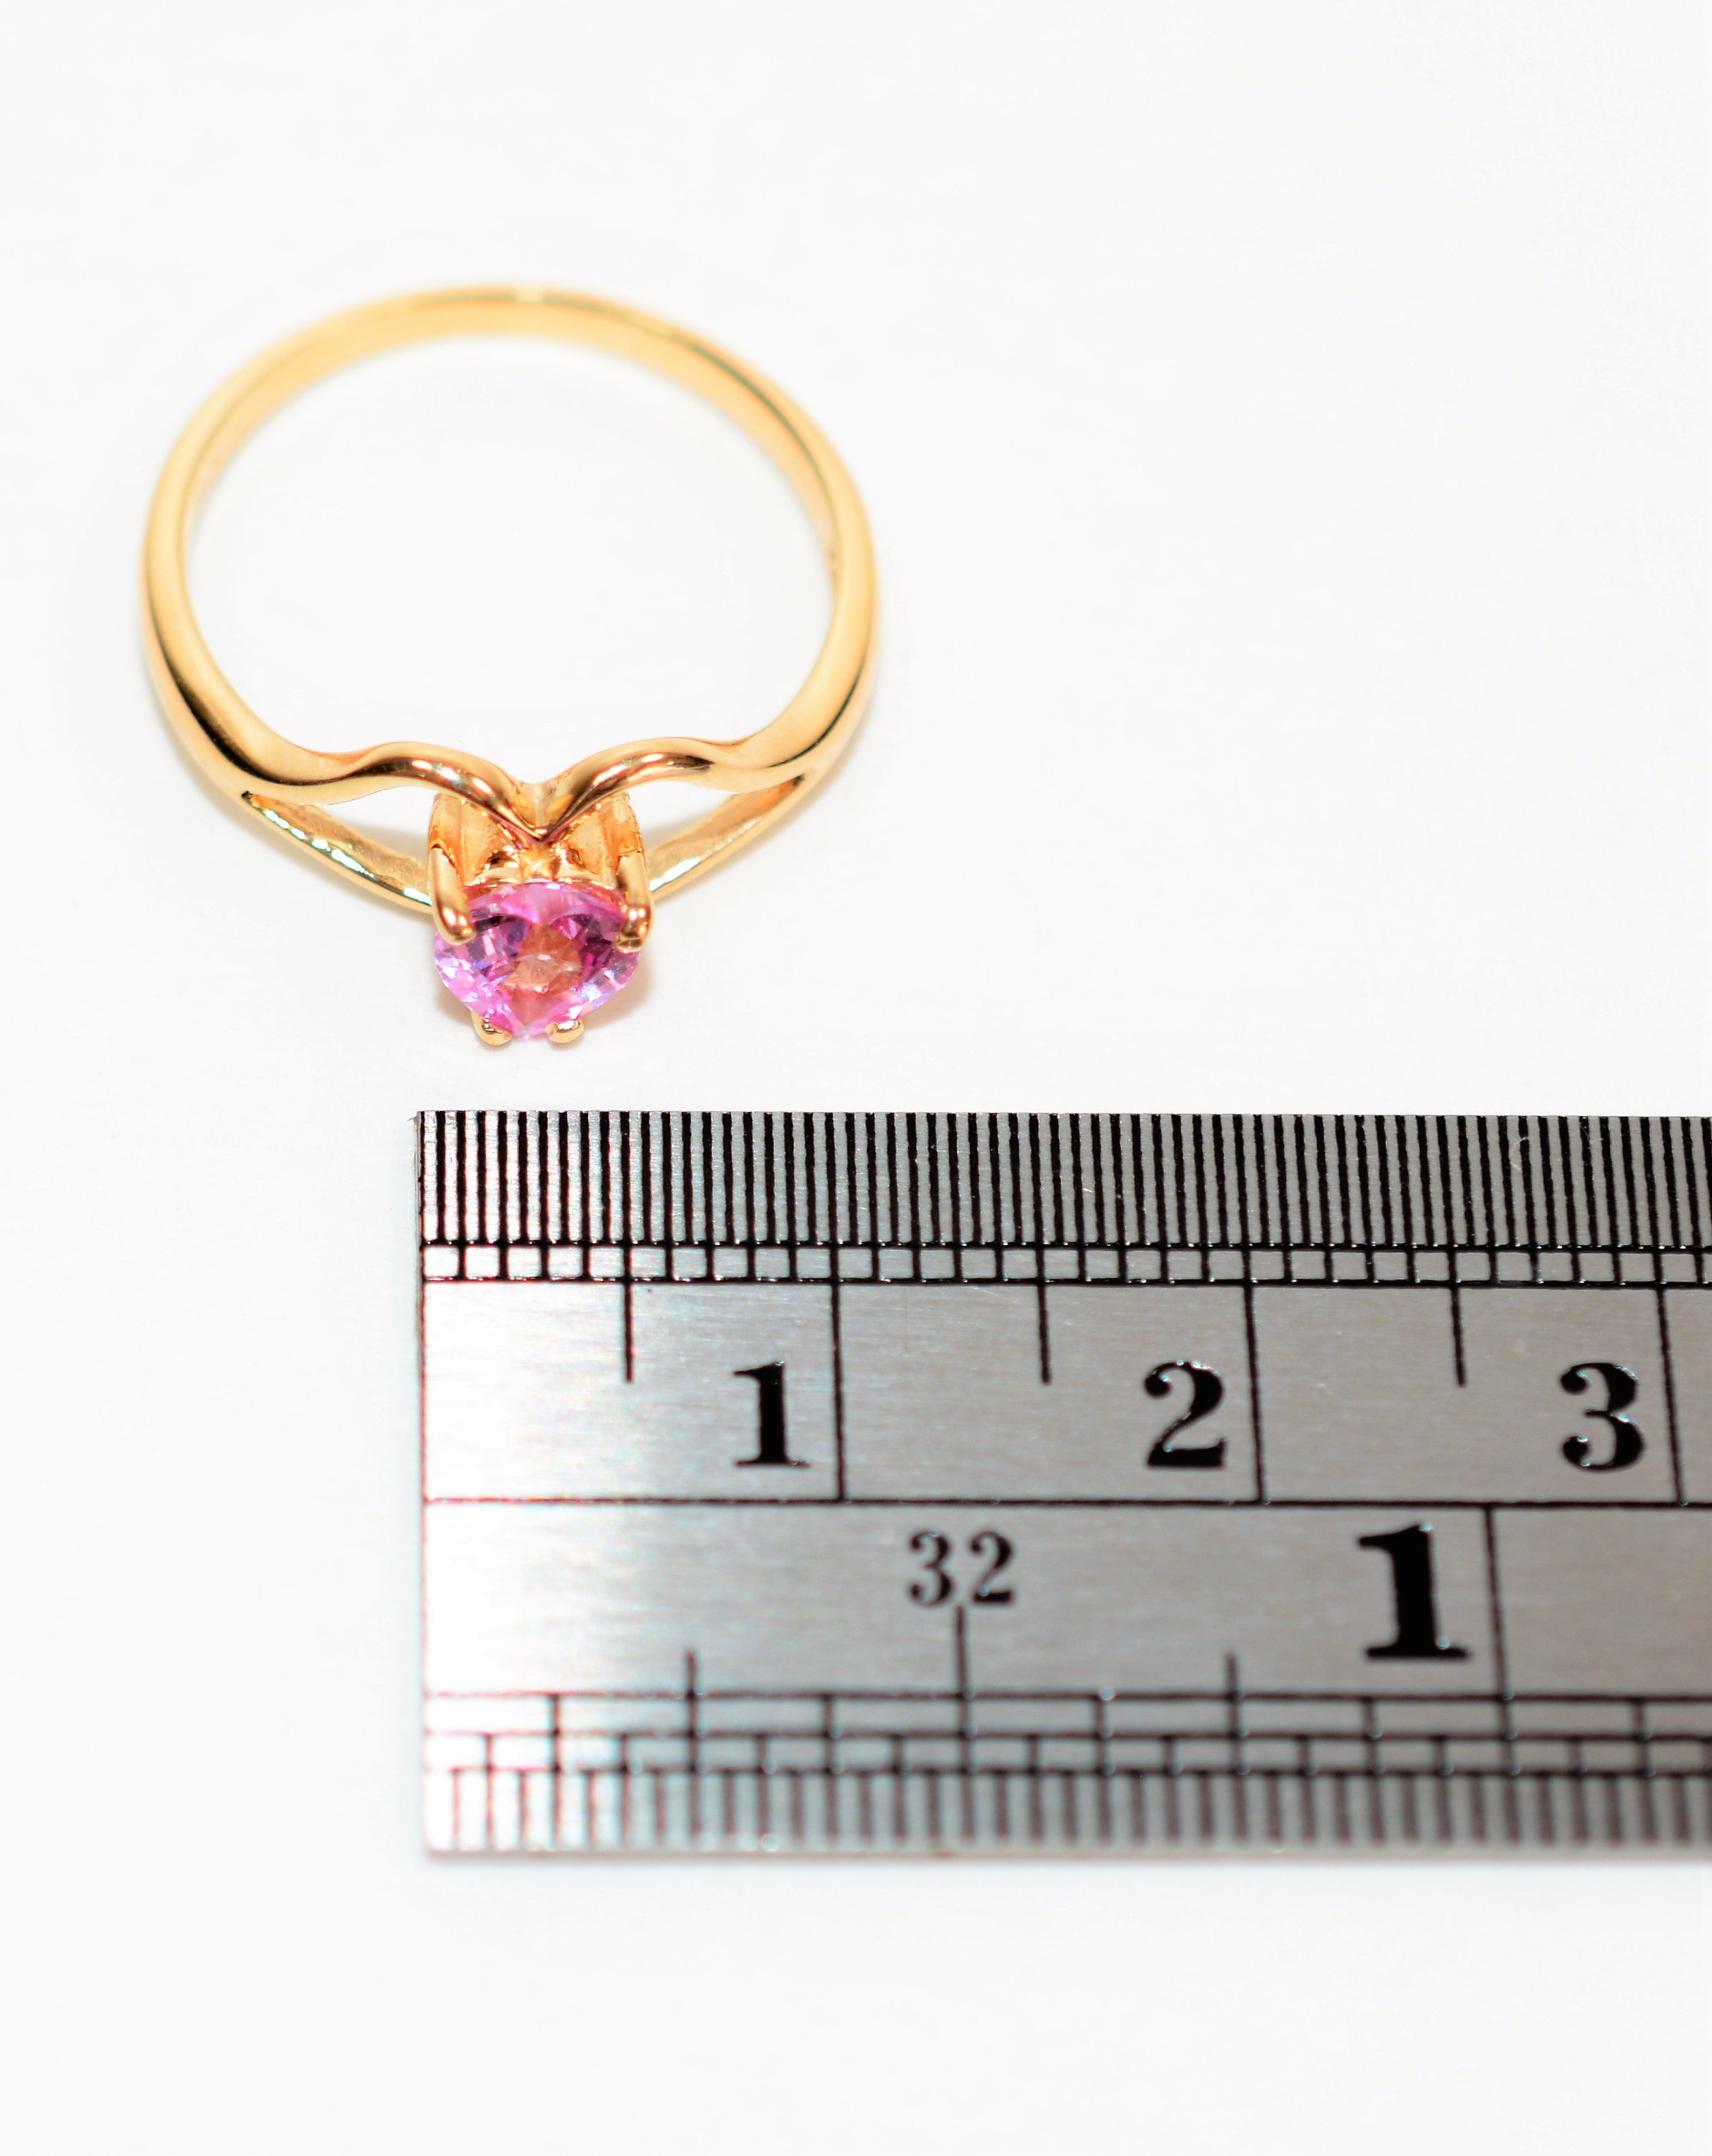 Natural Padparadscha Sapphire Ring 14K Solid Gold .50ct Heart Ring Gemstone Ring Promise Ring Engagement Ring Solitaire Ring Pink Ring Fine